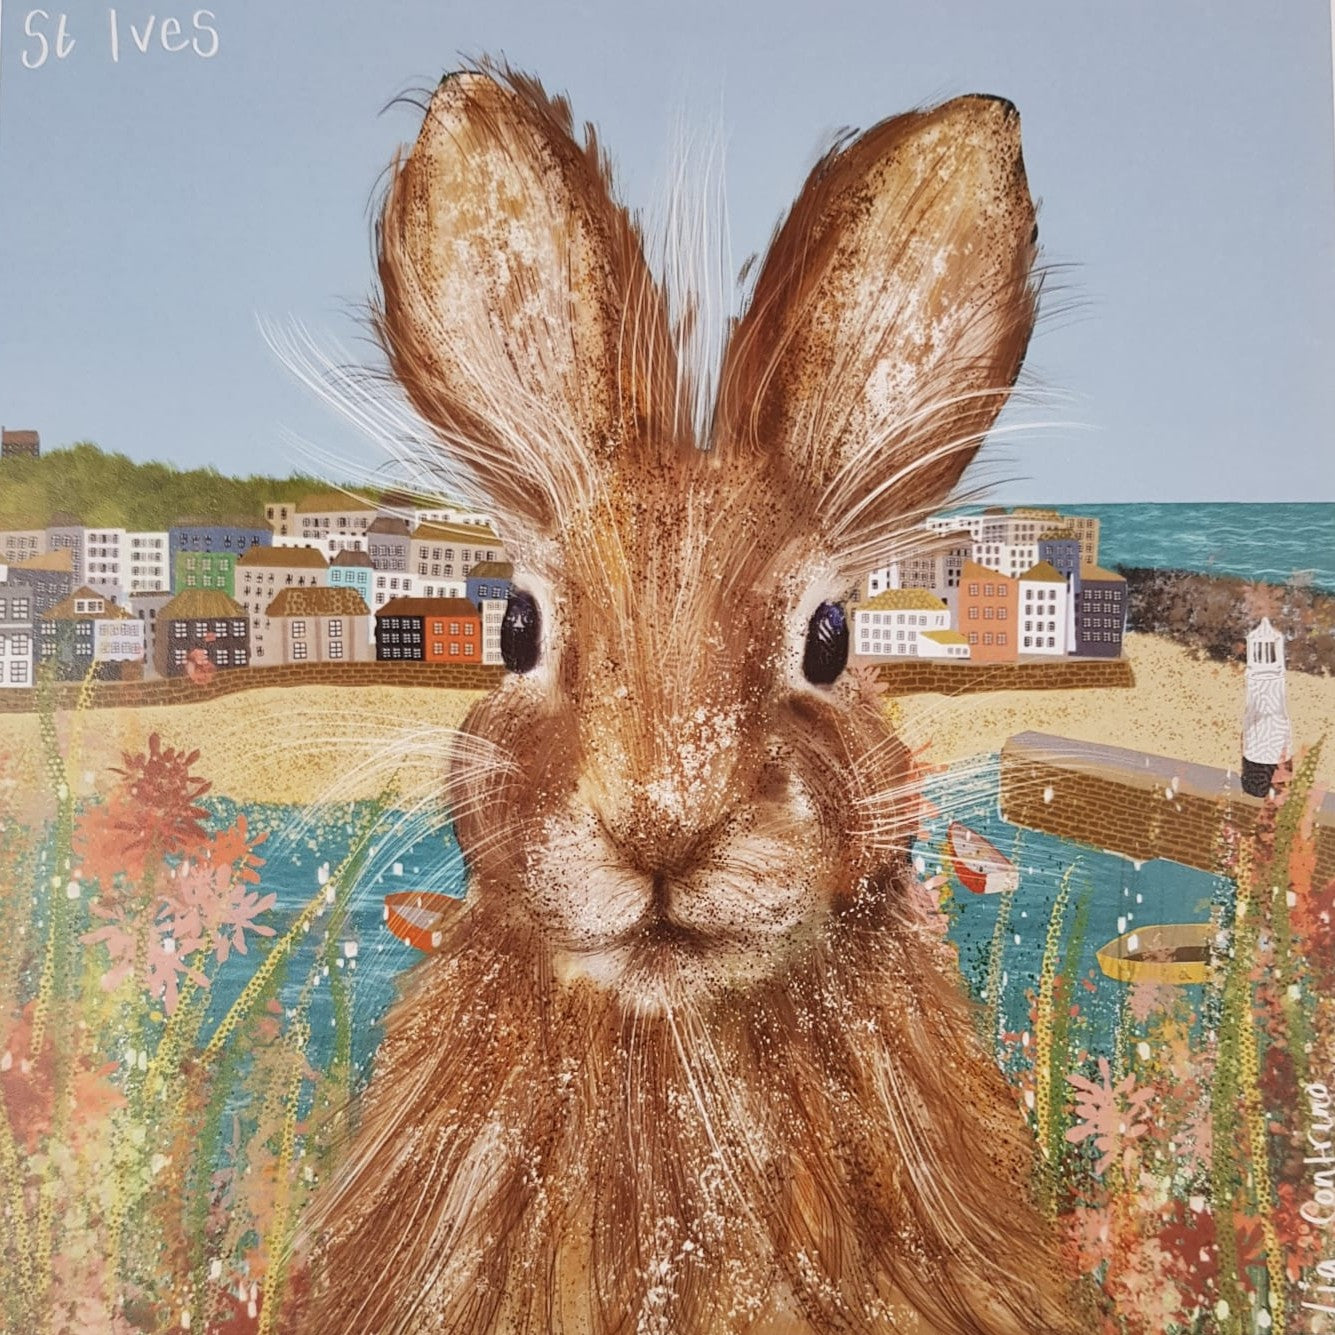 Hare And St Ives